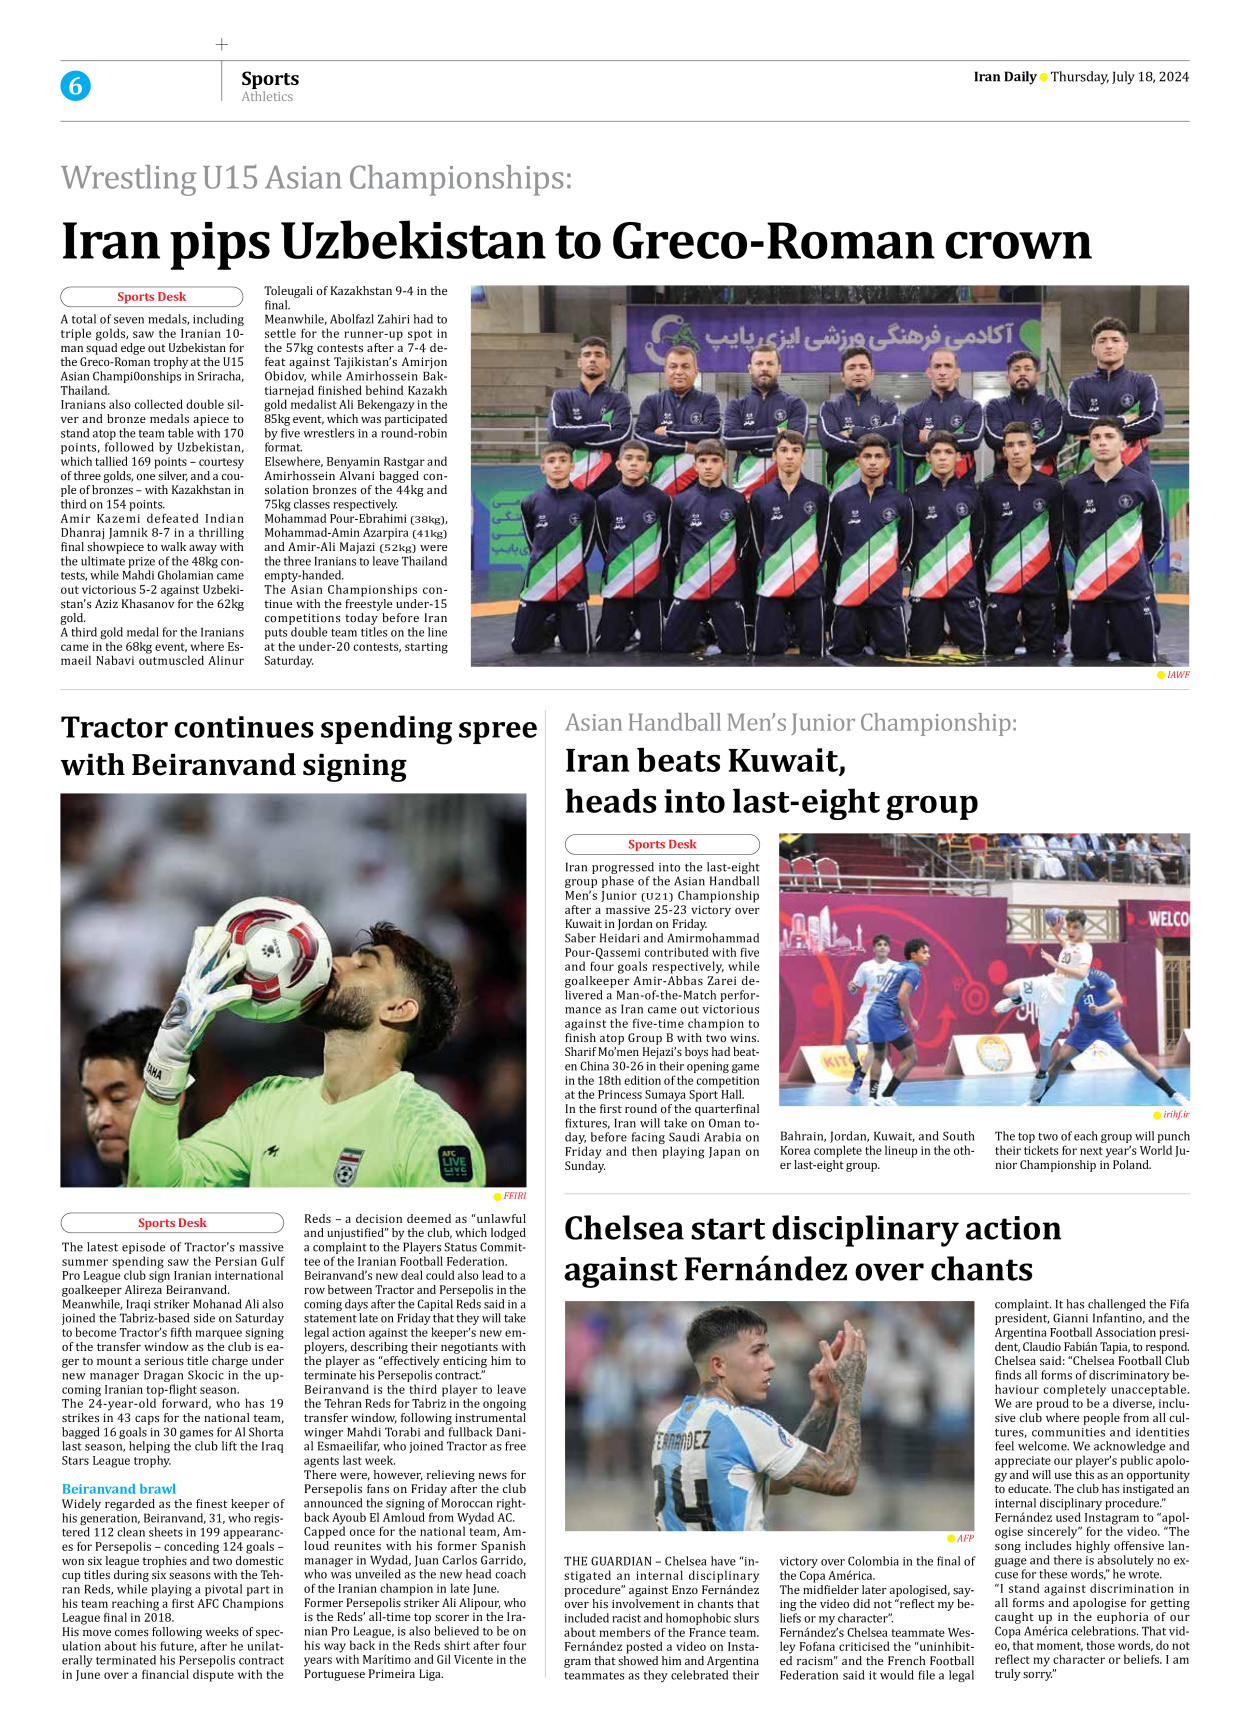 Iran Daily - Number Seven Thousand Six Hundred and Six - 18 July 2024 - Page 6